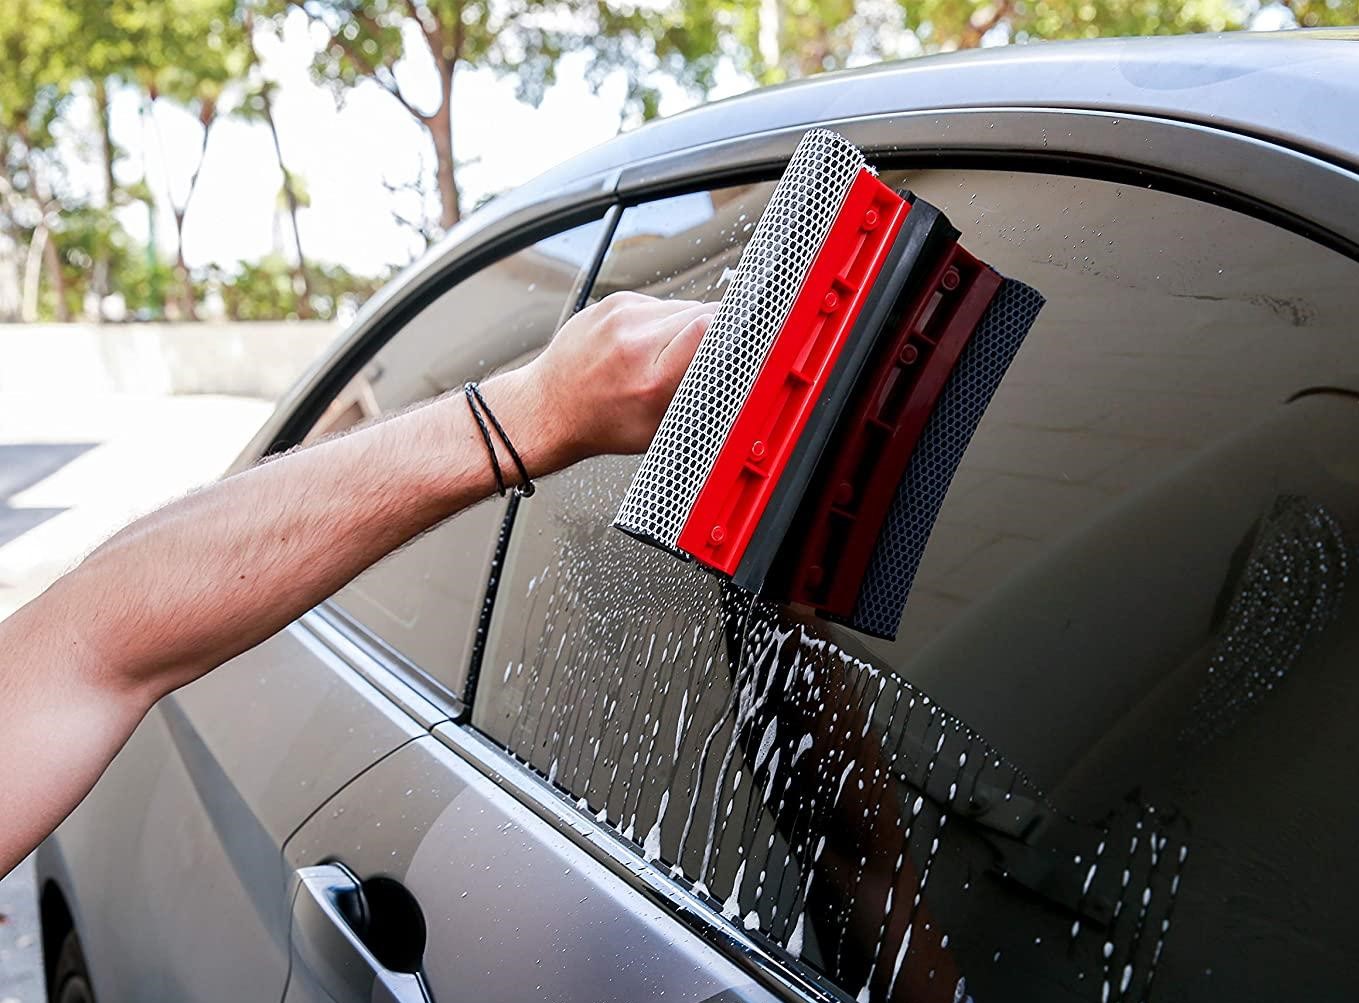 How To Use A Squeegee On Car Windows